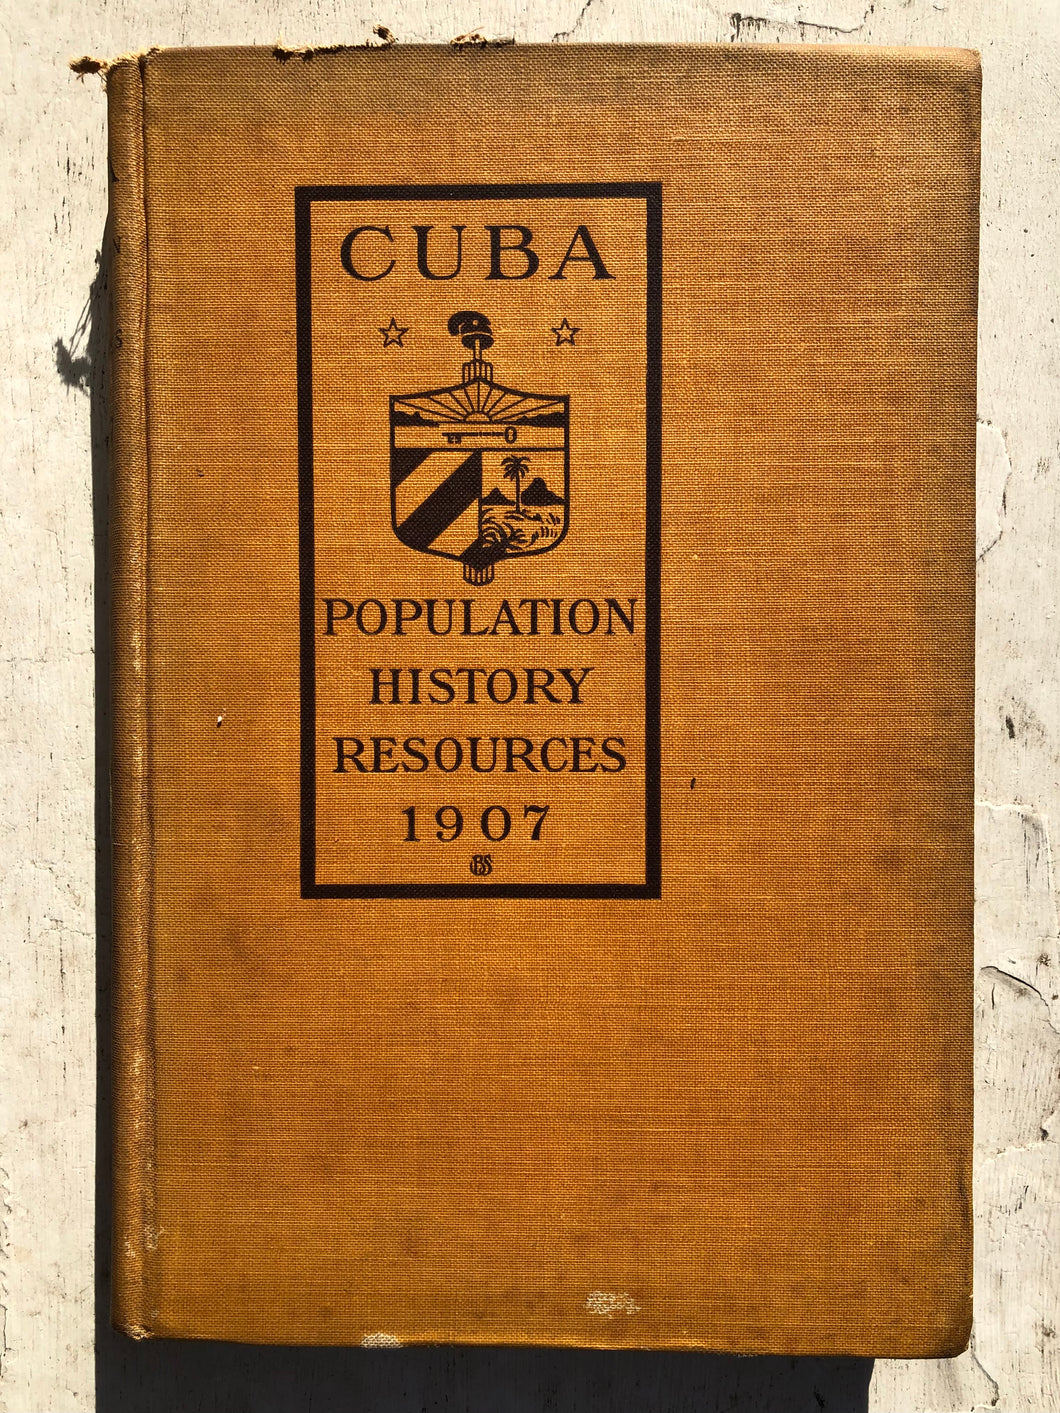 Cuba: Population, History and Resources 1907. Compiled by Victor H. Olmsted and Henry Gannett